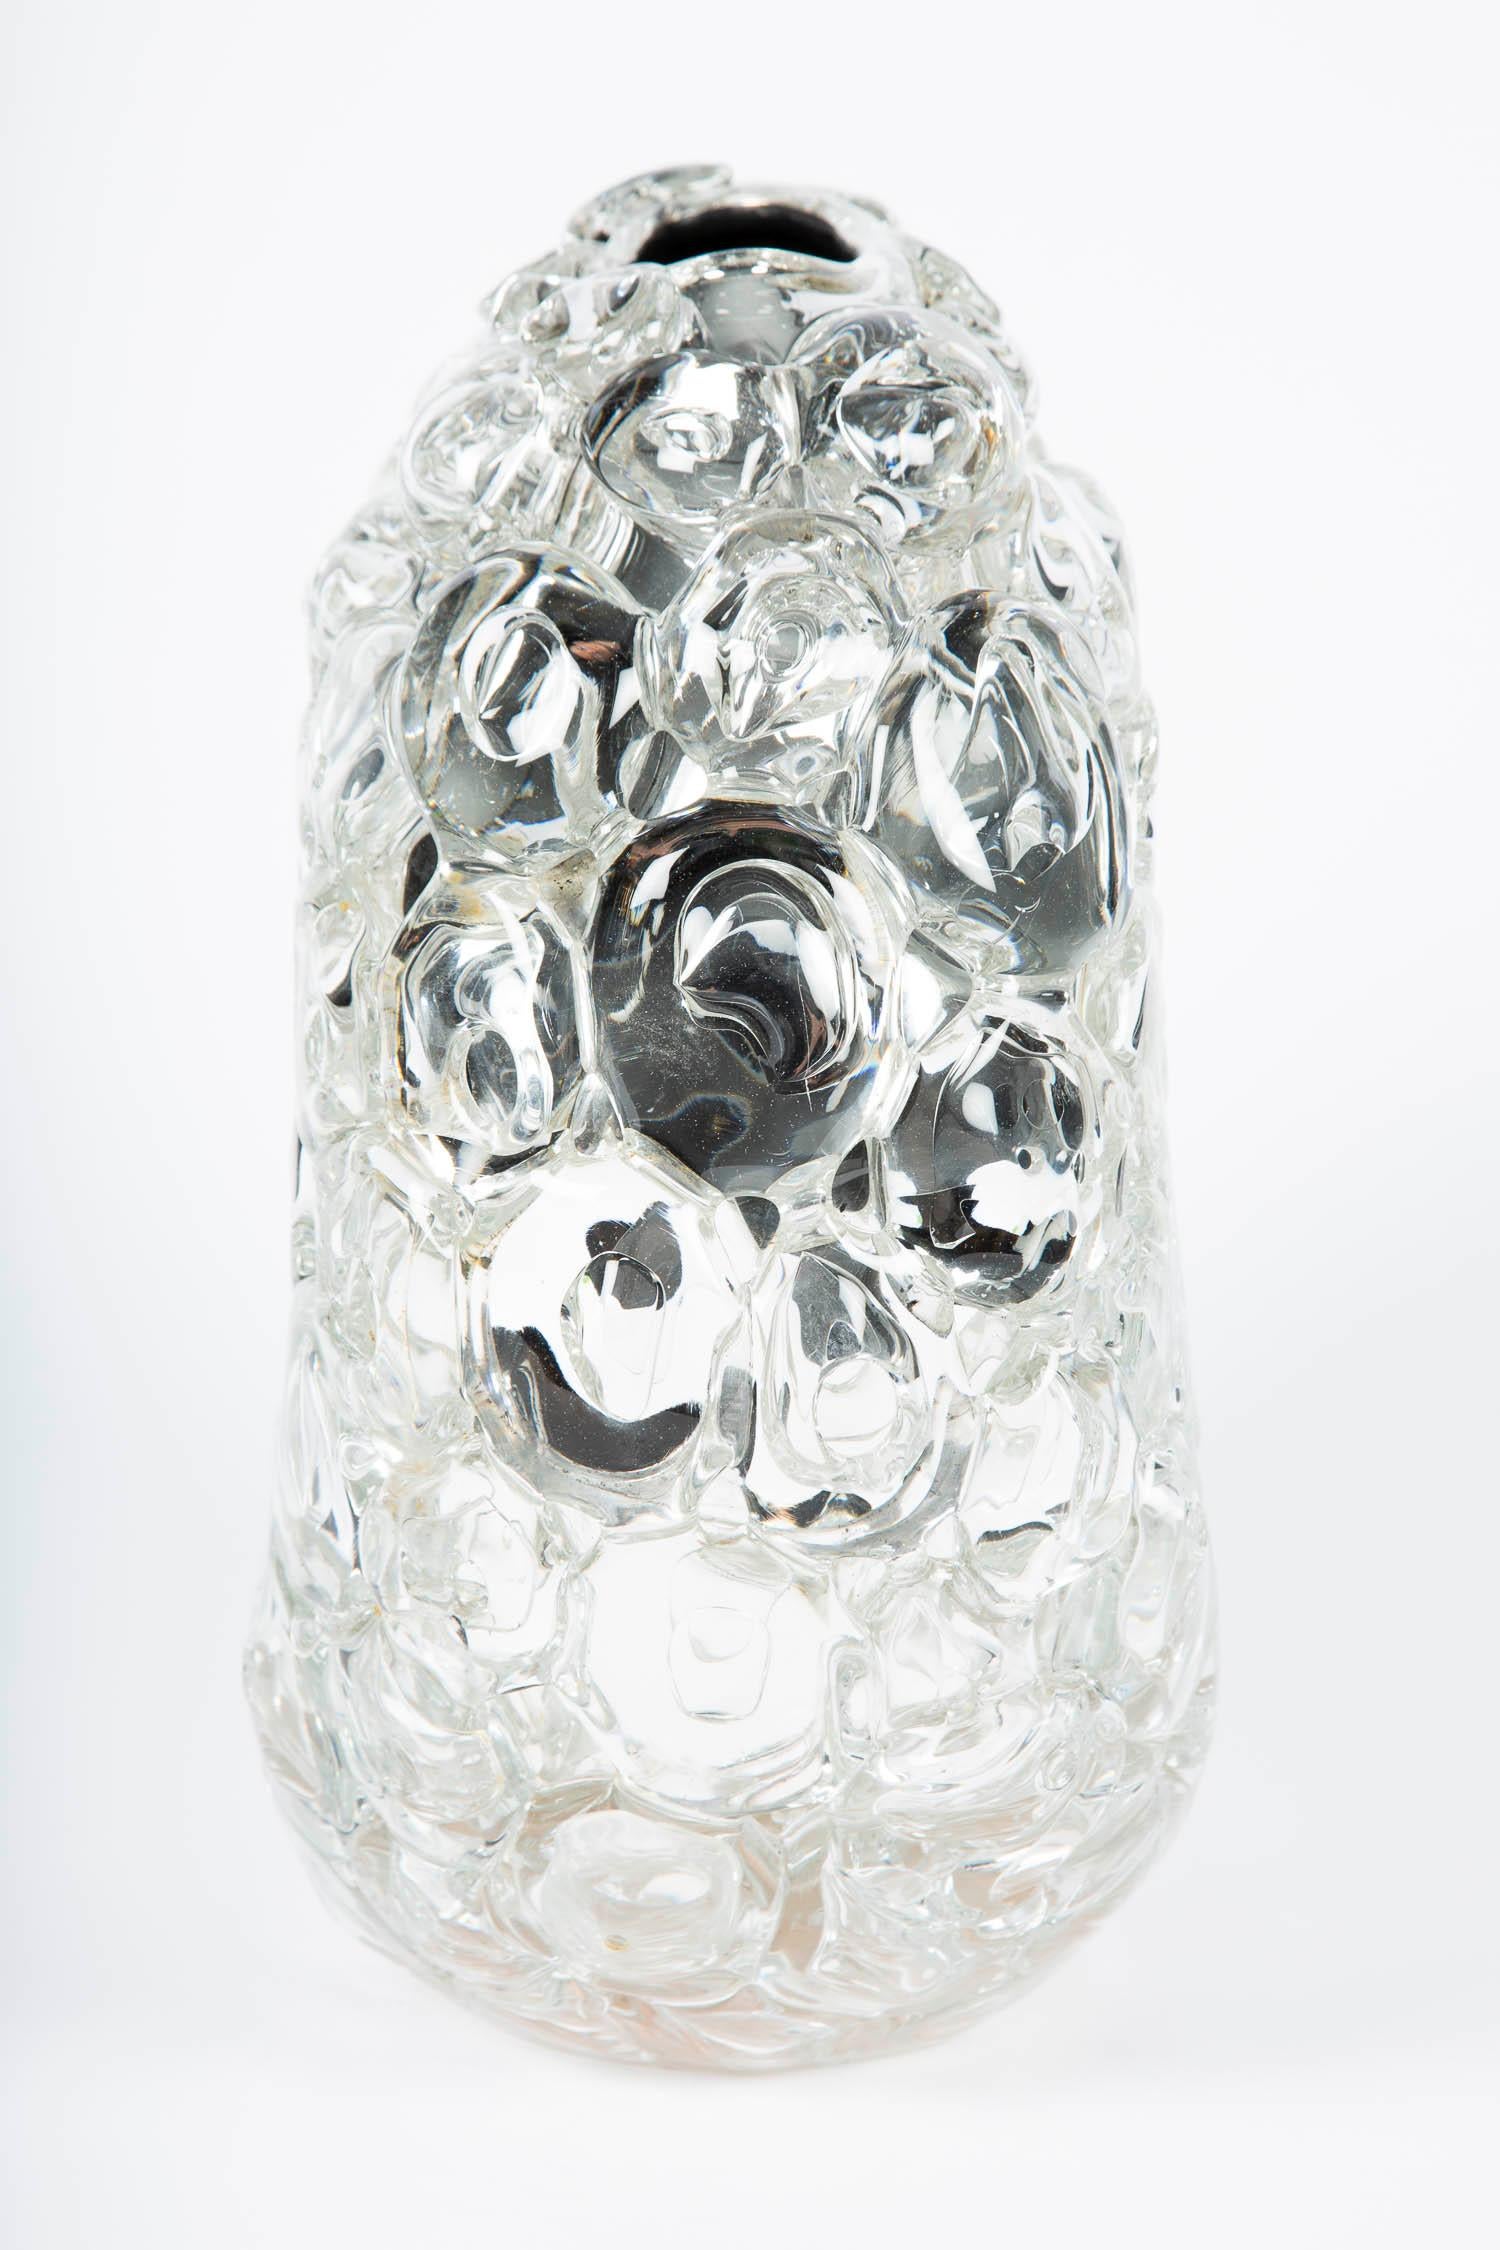 Hand-Crafted Bubblewrap in Clear, a Unique silver & clear glass Vase by Allister Malcolm